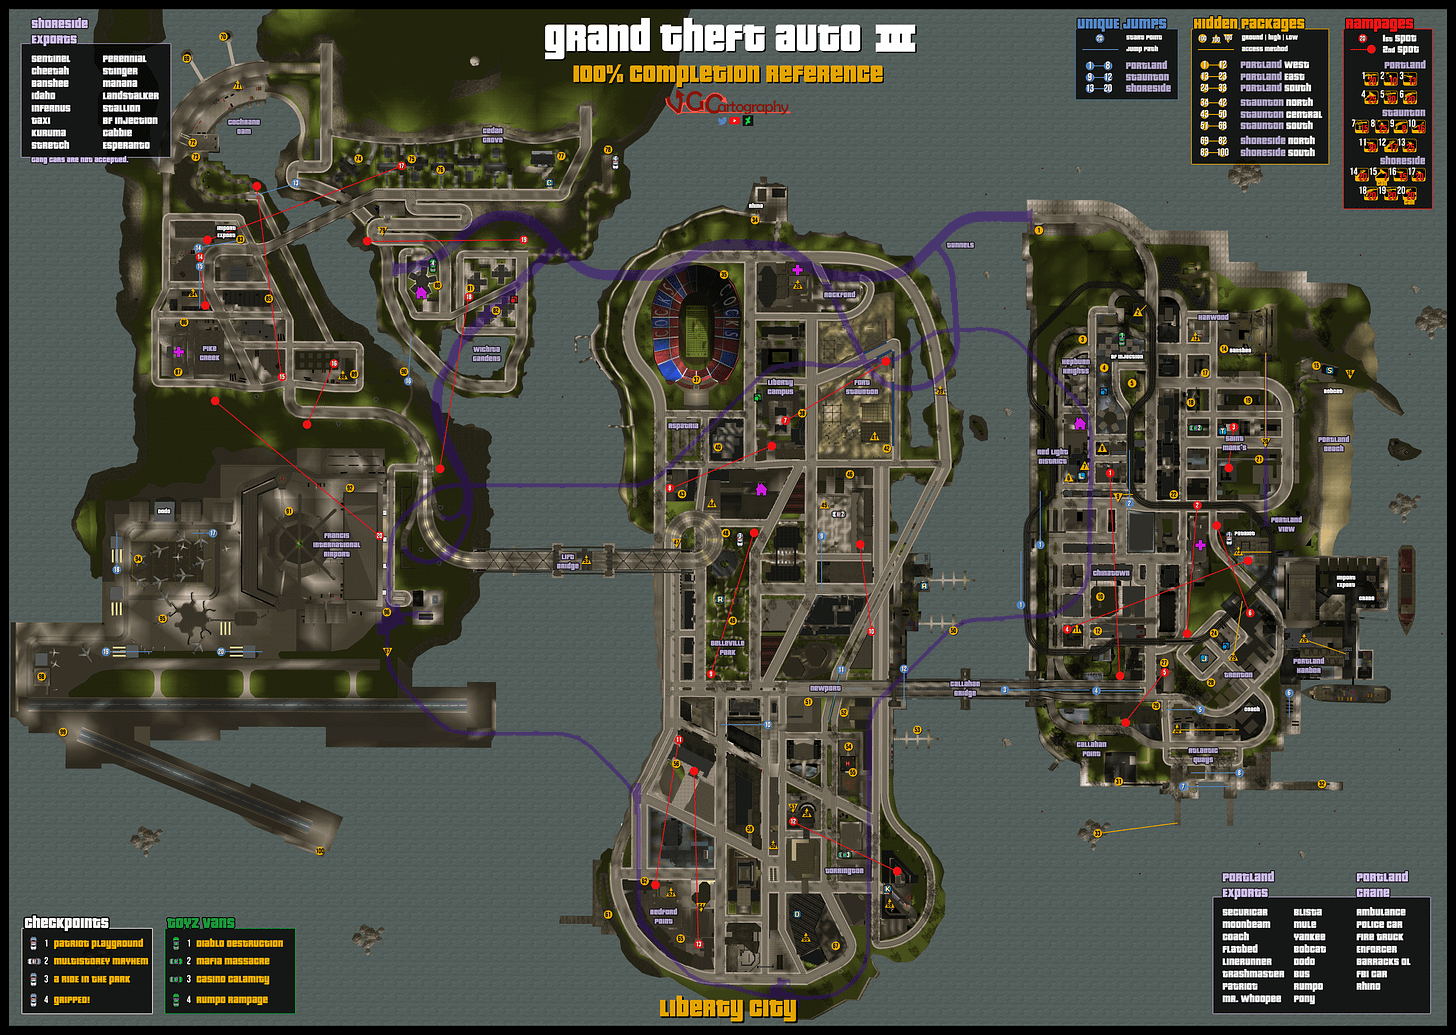 Grand Theft Auto 3 | 100% Completion Reference Map by VGCartography on  DeviantArt